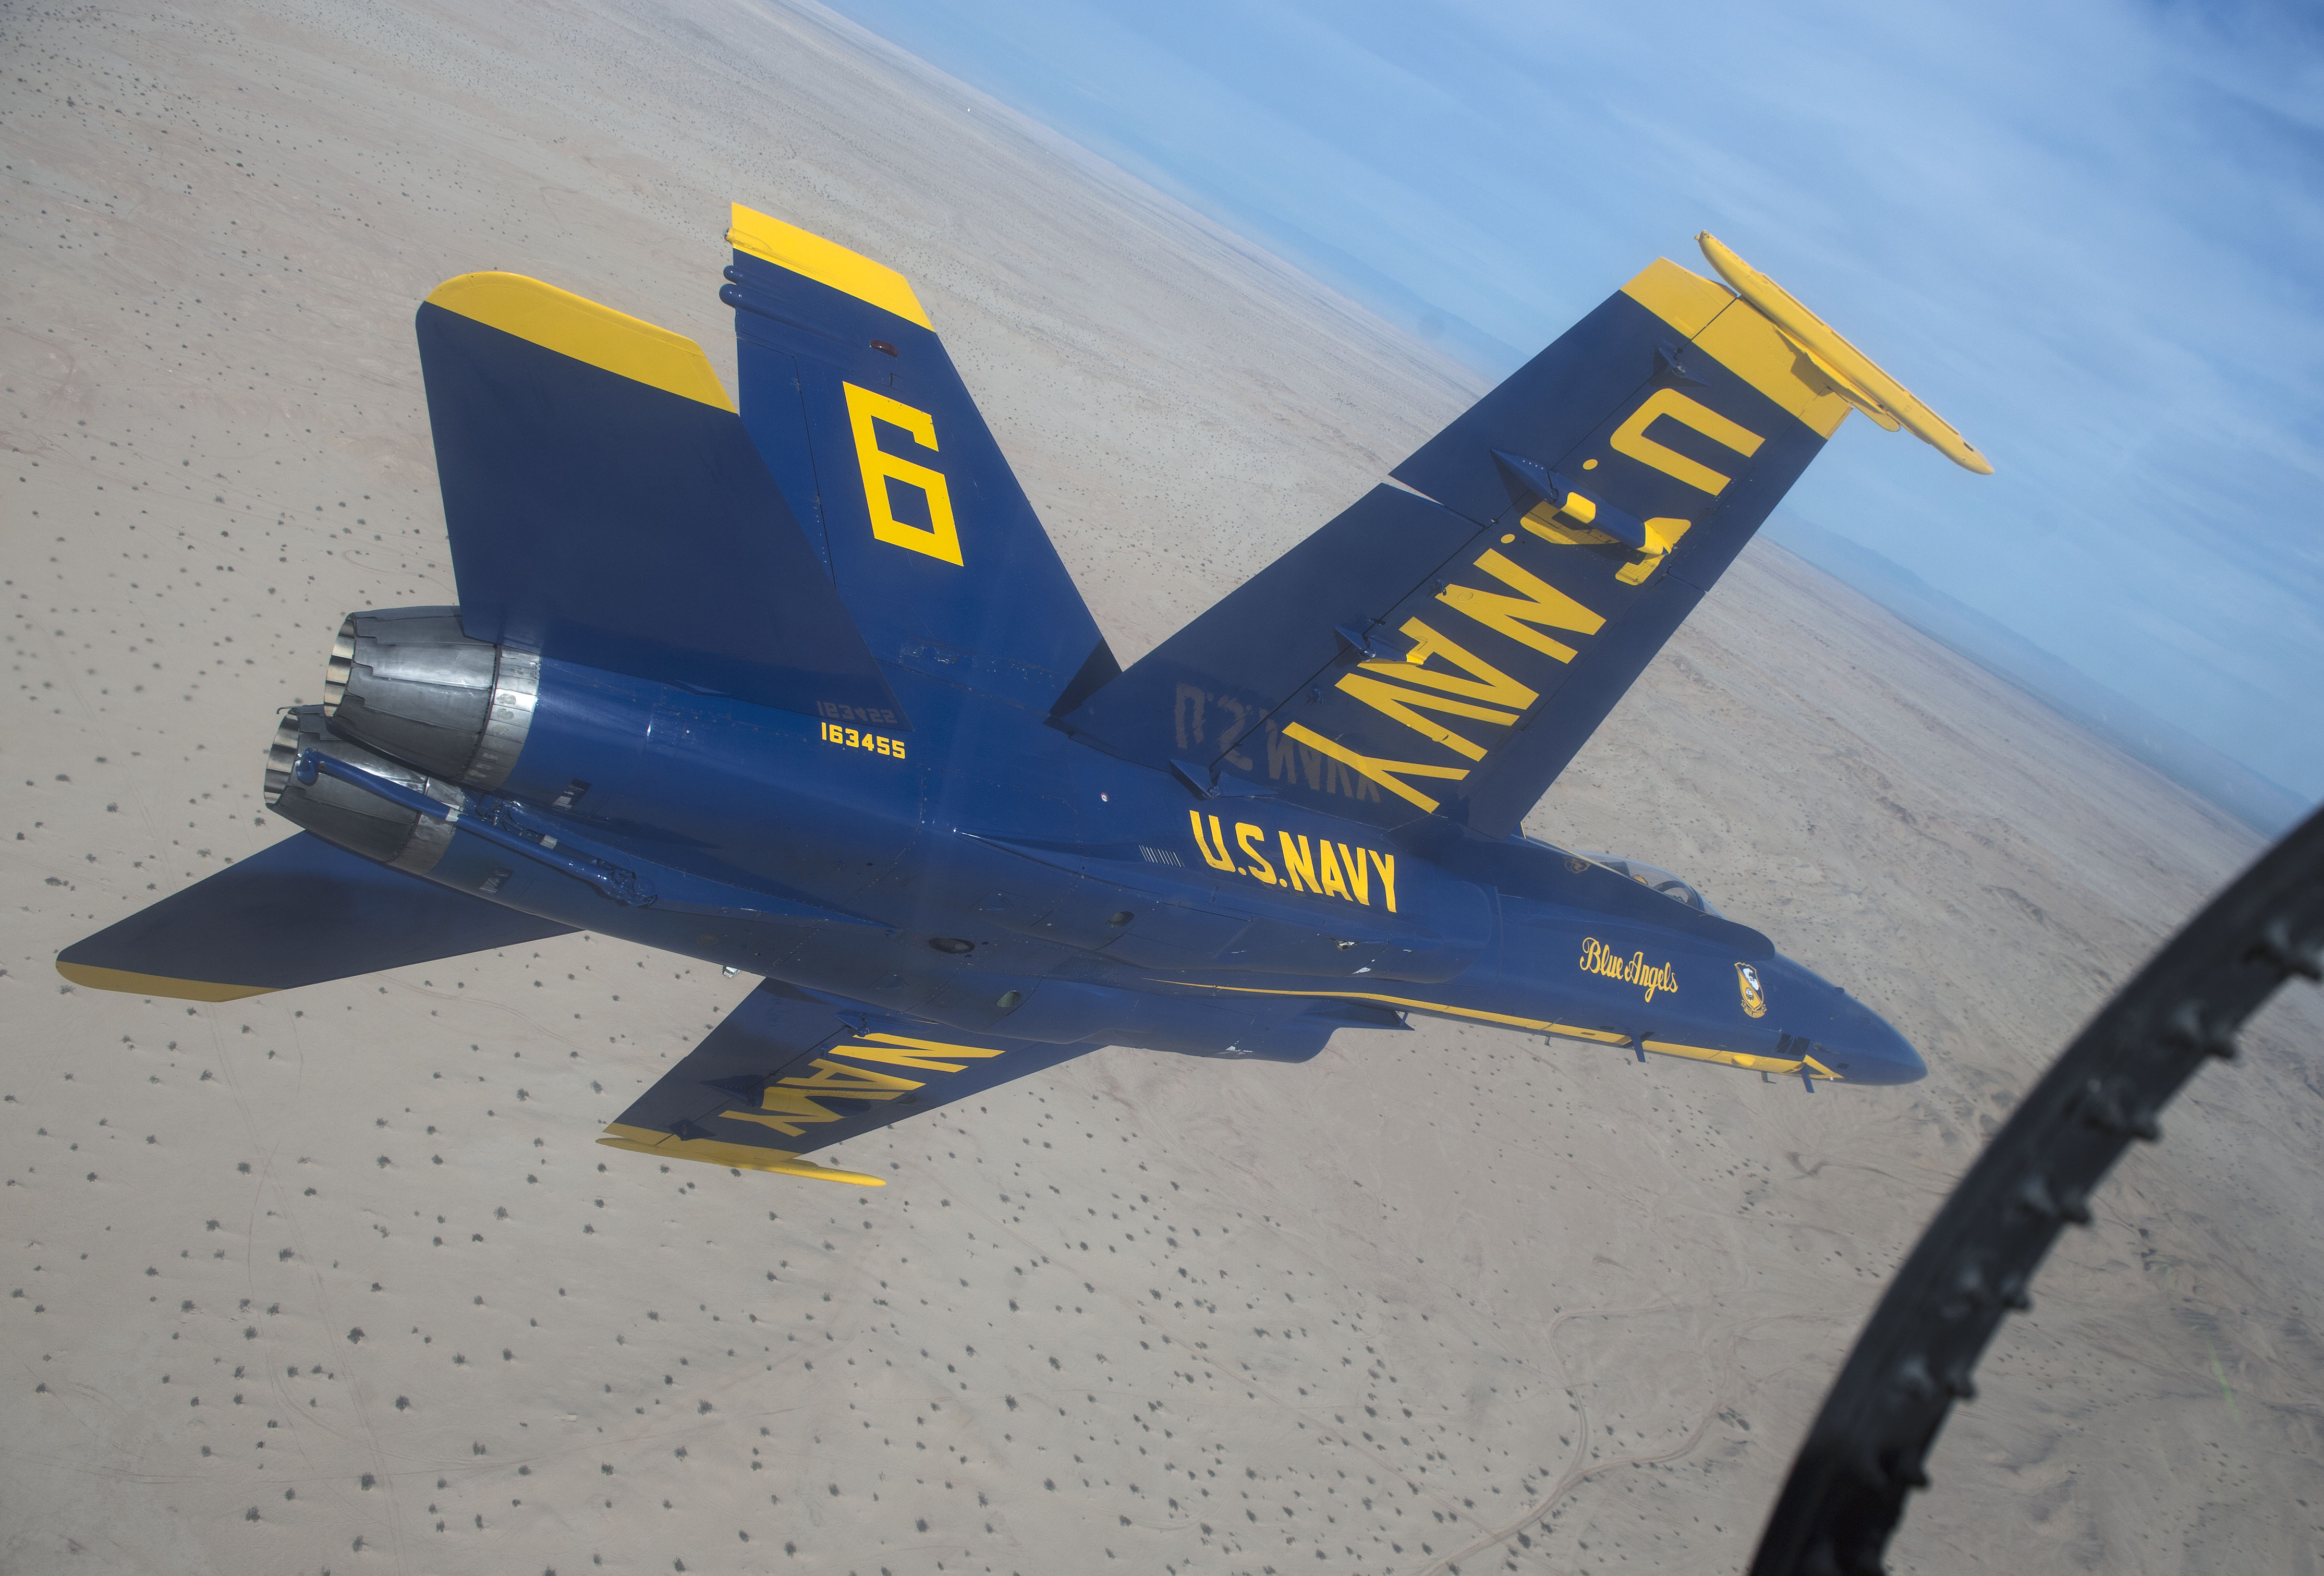 US Navy Flight Demonstration Squadron, the Blue Angels F/A-18 flown by Marine Capt. Jeff Kuss. on Jan. 16, 2016. 